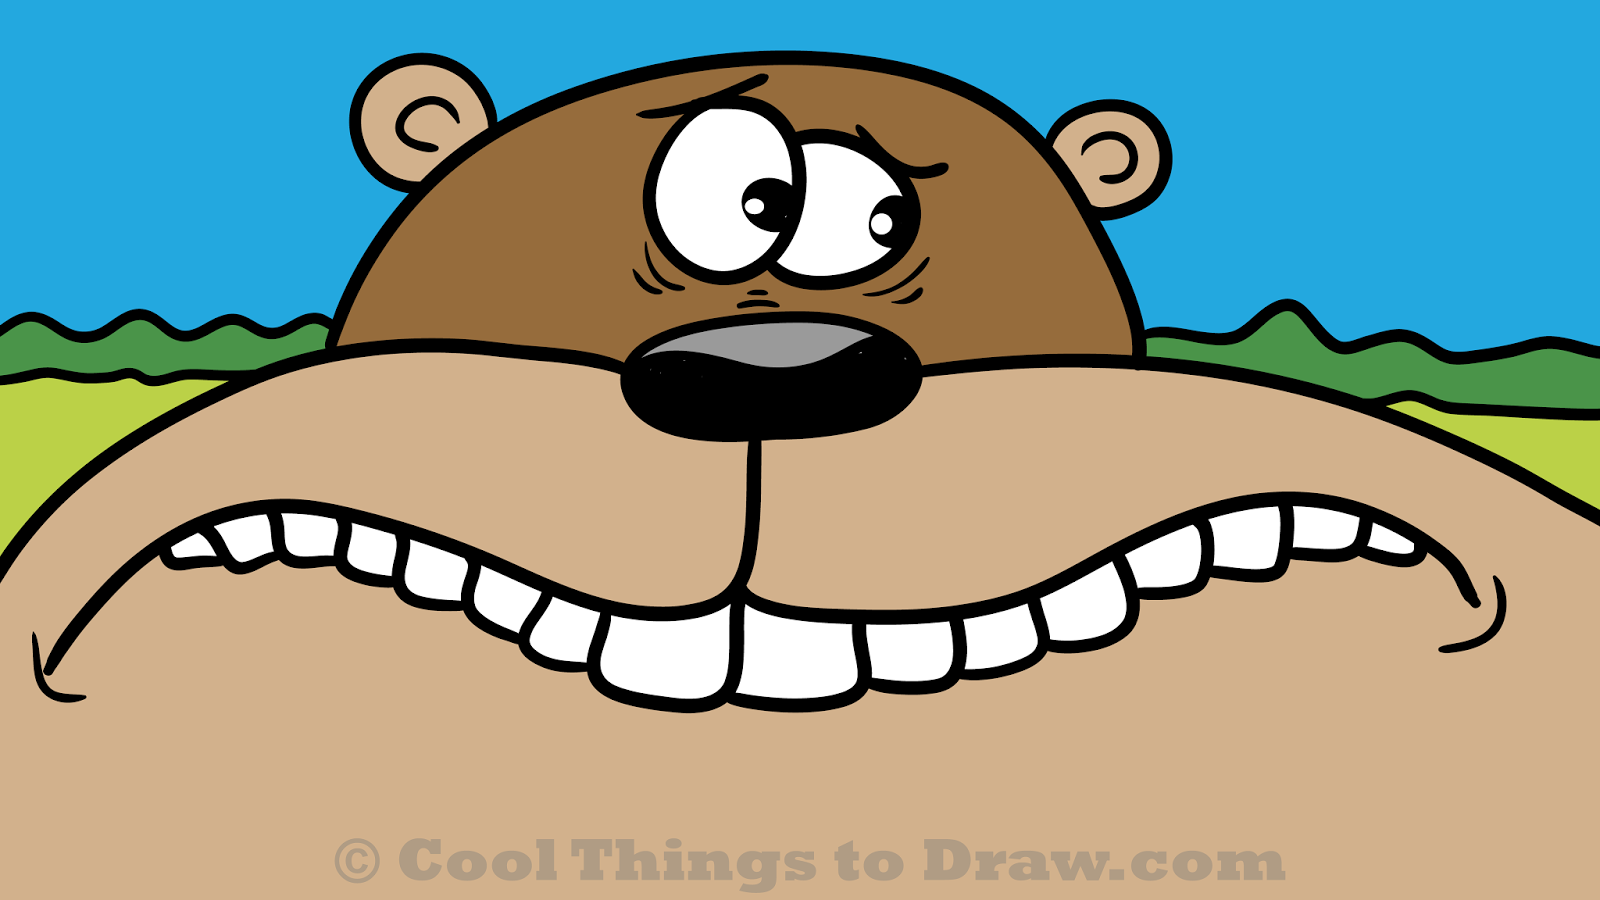 Free Cool Drawings For Kids, Download Free Clip Art, Free Clip Art on Clipart Library